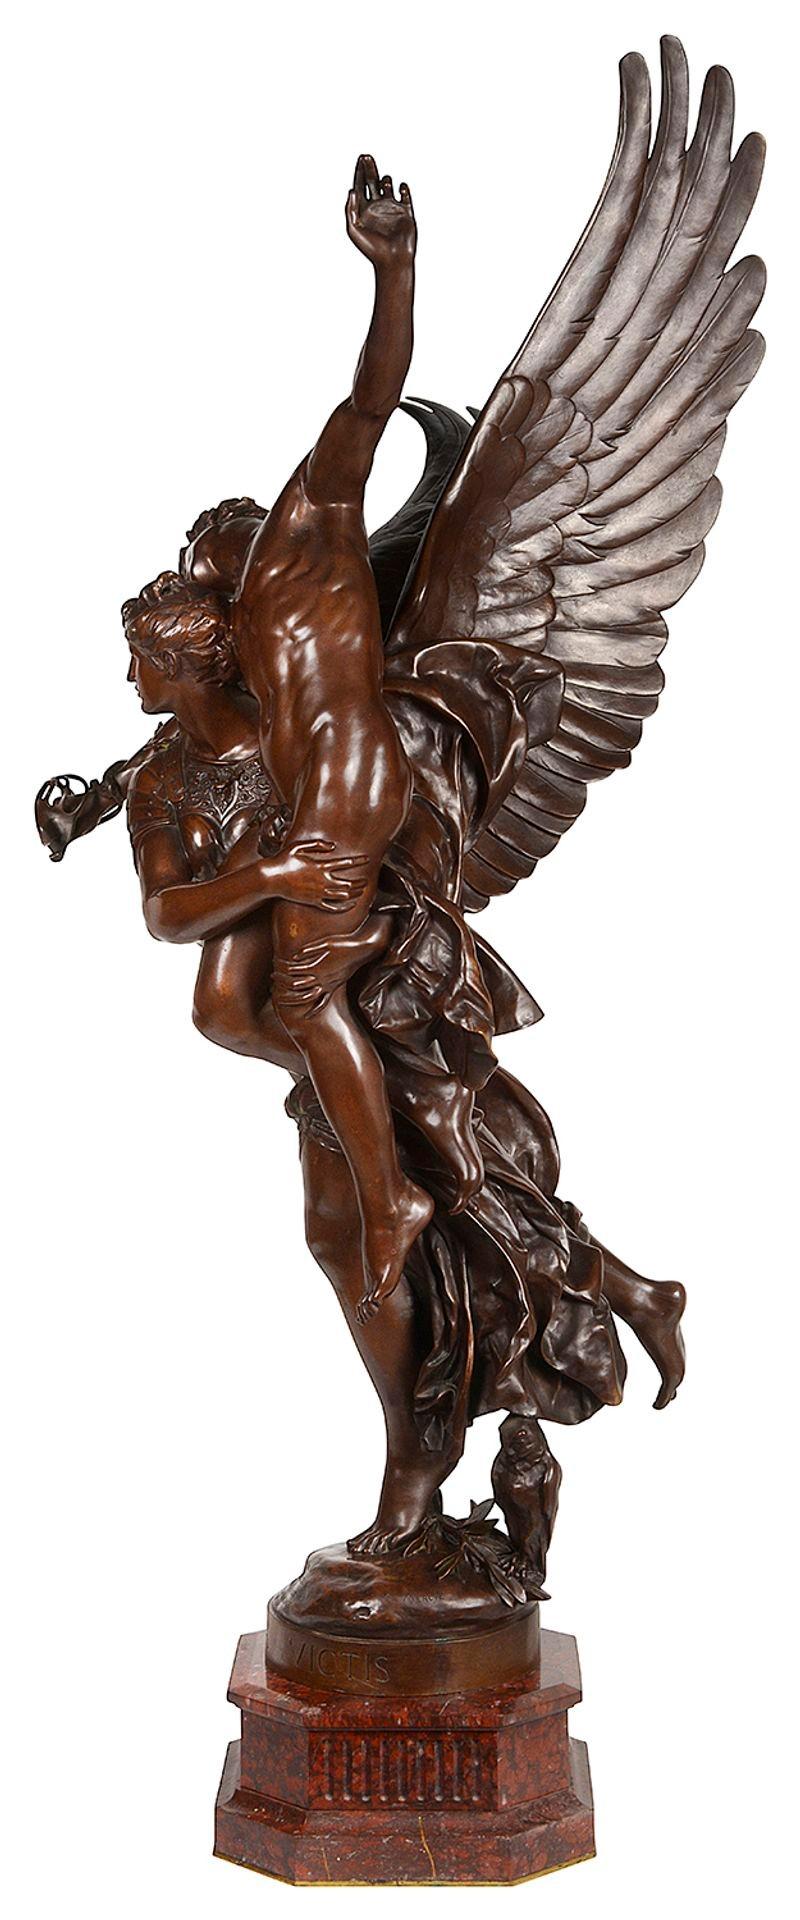 A fine quality bronze sculpture of Gloria Carrying the Angel Victis, Cast by Barbedienne and After a Model by Marius-Jean-Antonin Mercie´ (French, 1845-1916). The draped figure of Gloria carrying the angel Victis, mounted on a rouge marble